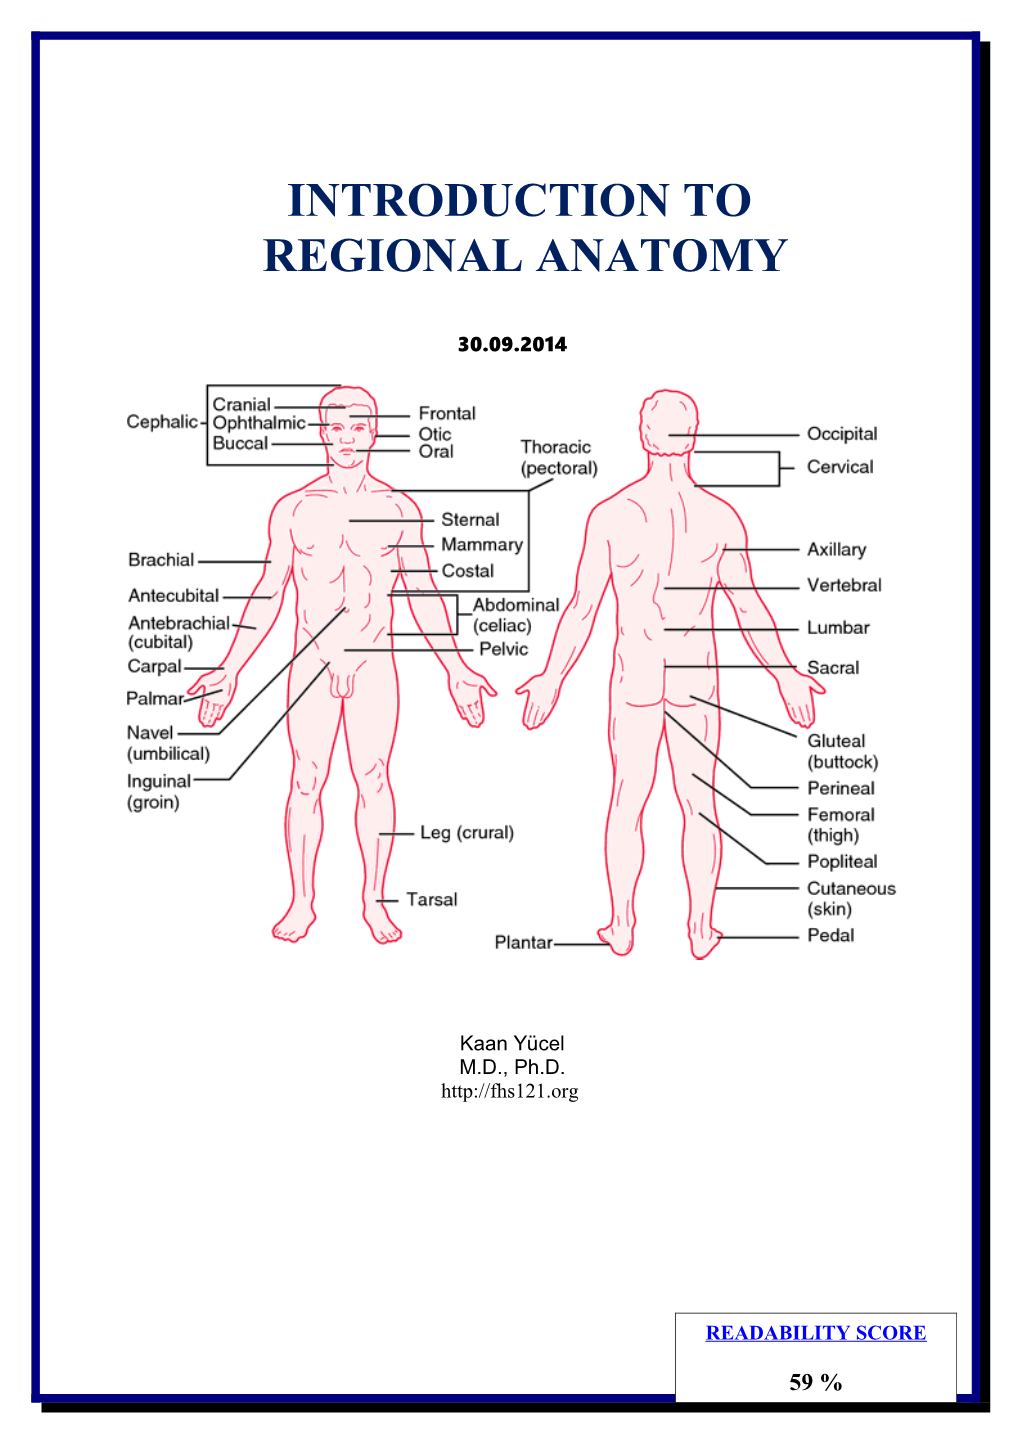 Dr.Kaan Yücel Introduction to Regional Anatomy